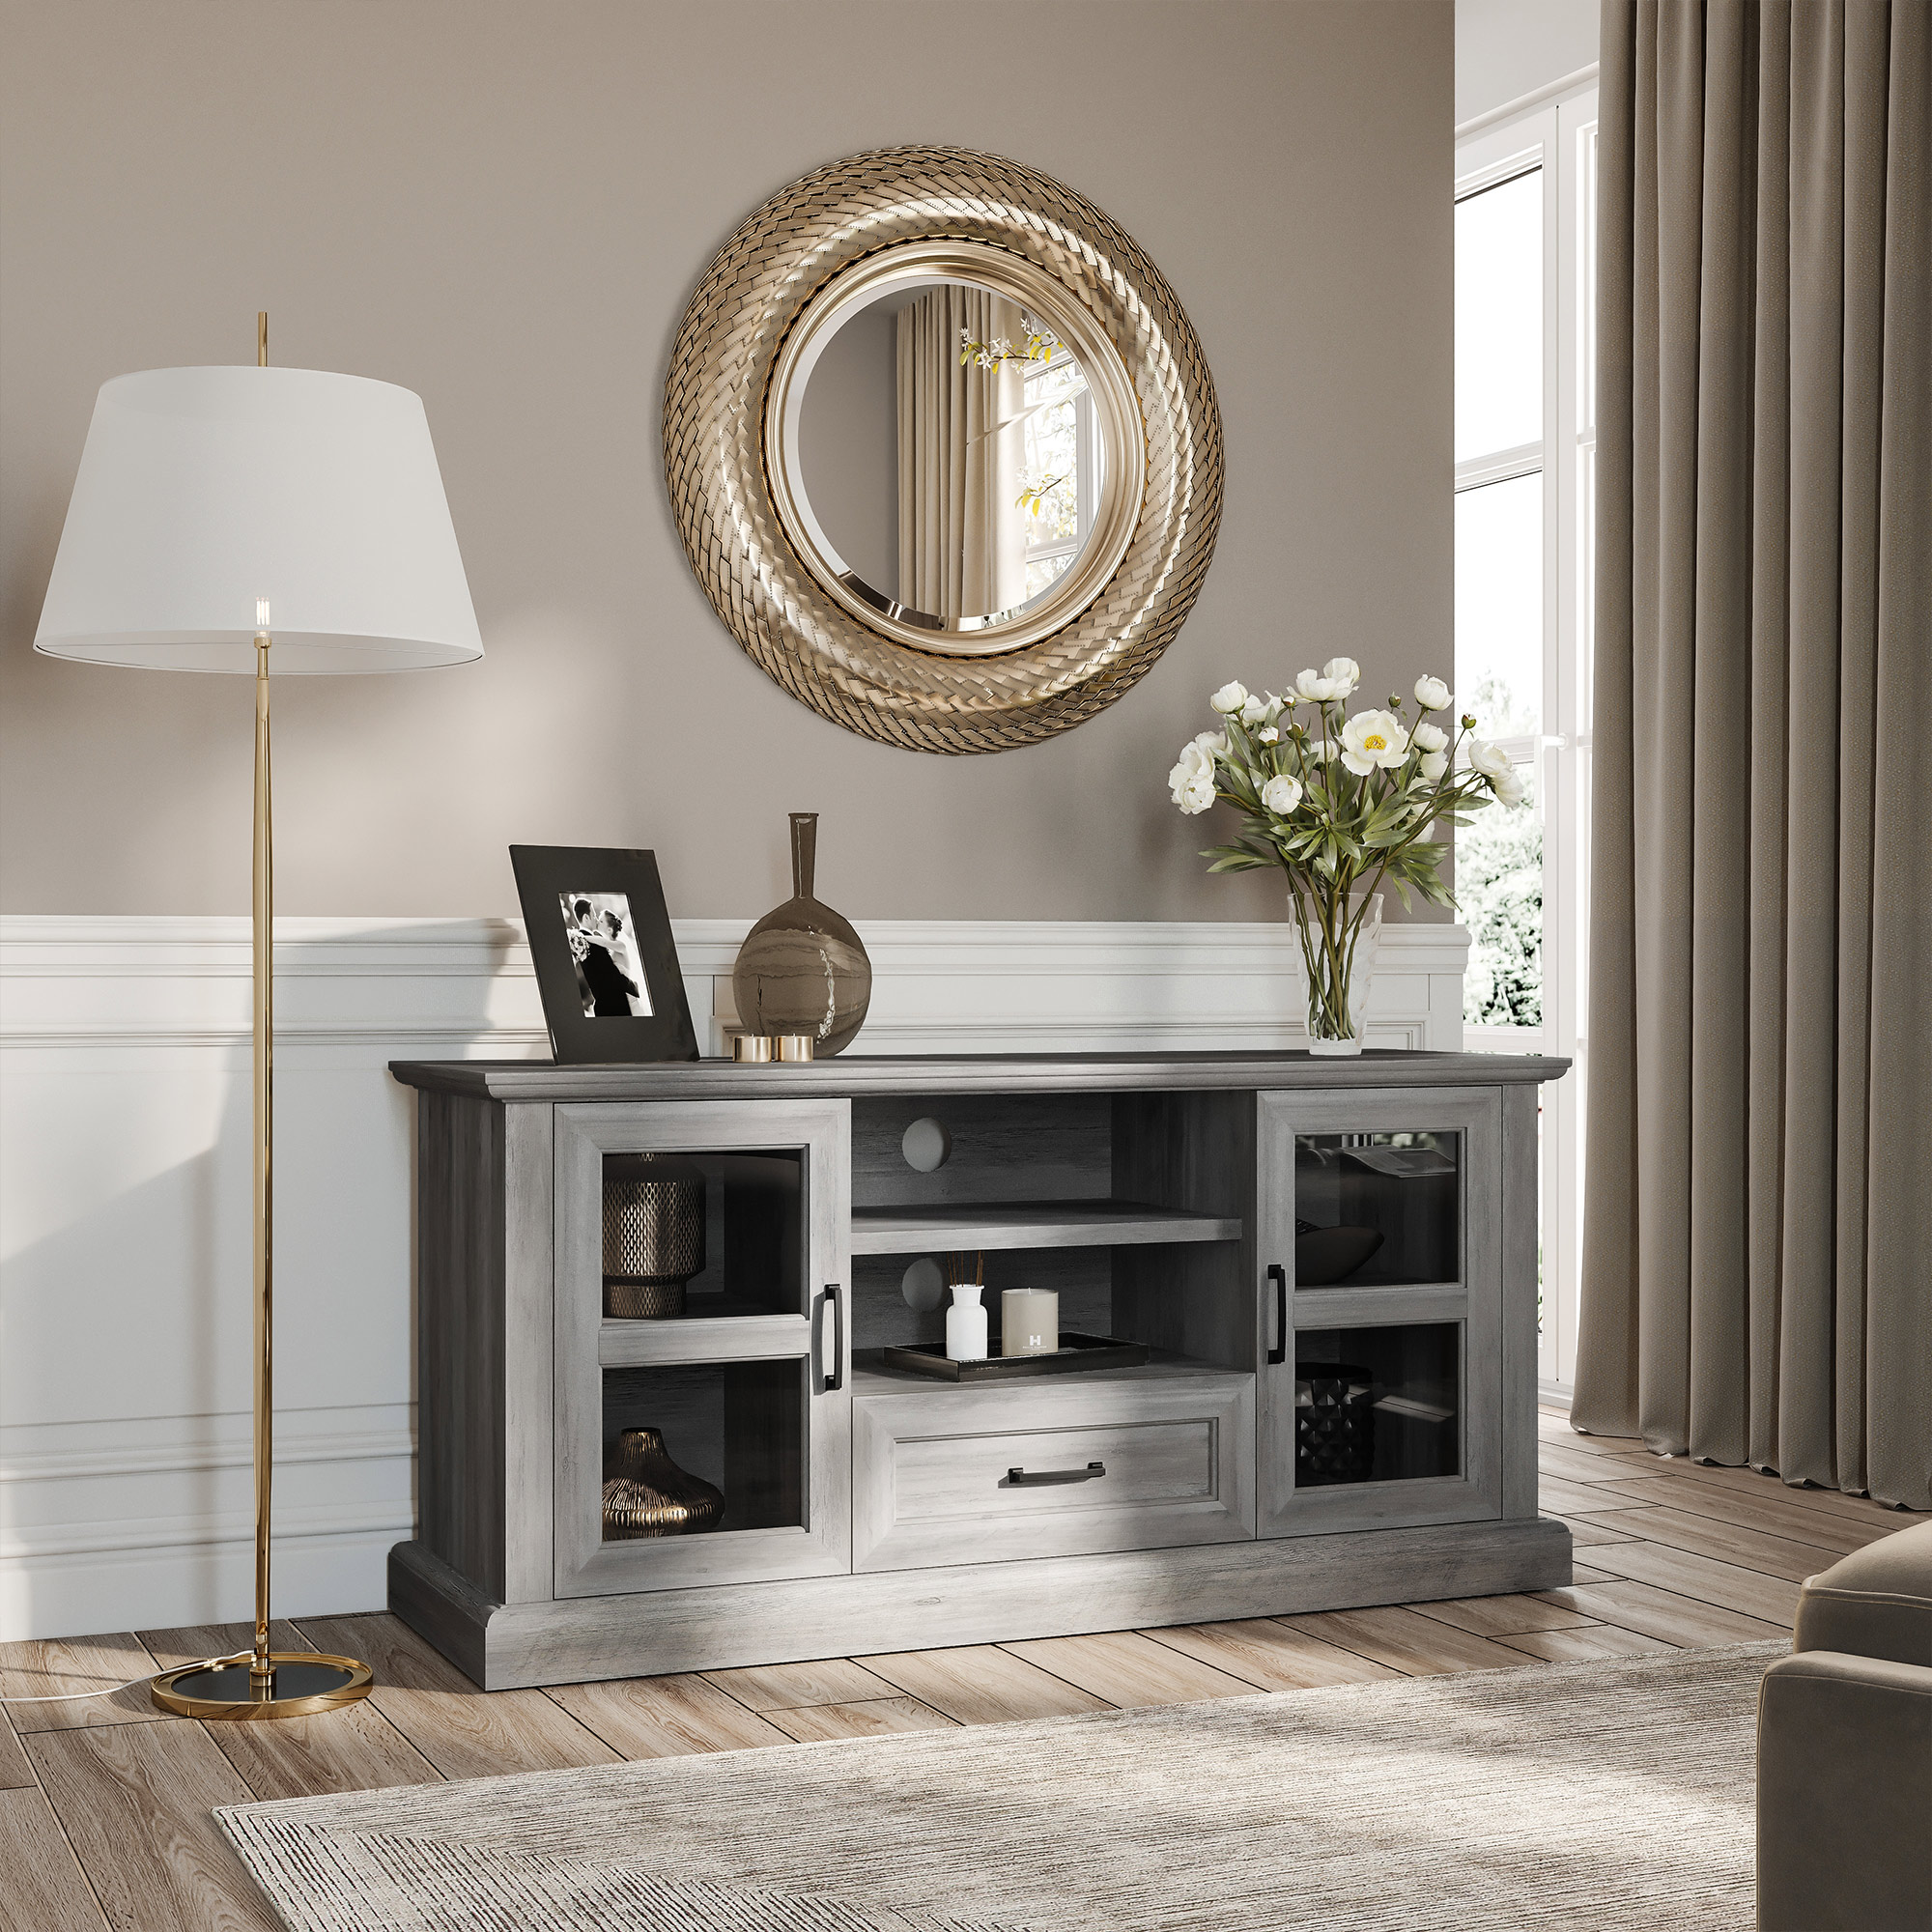 BELLEZE Rustic Modern TV Stand - Trussati (Gray Wash) - image 2 of 7